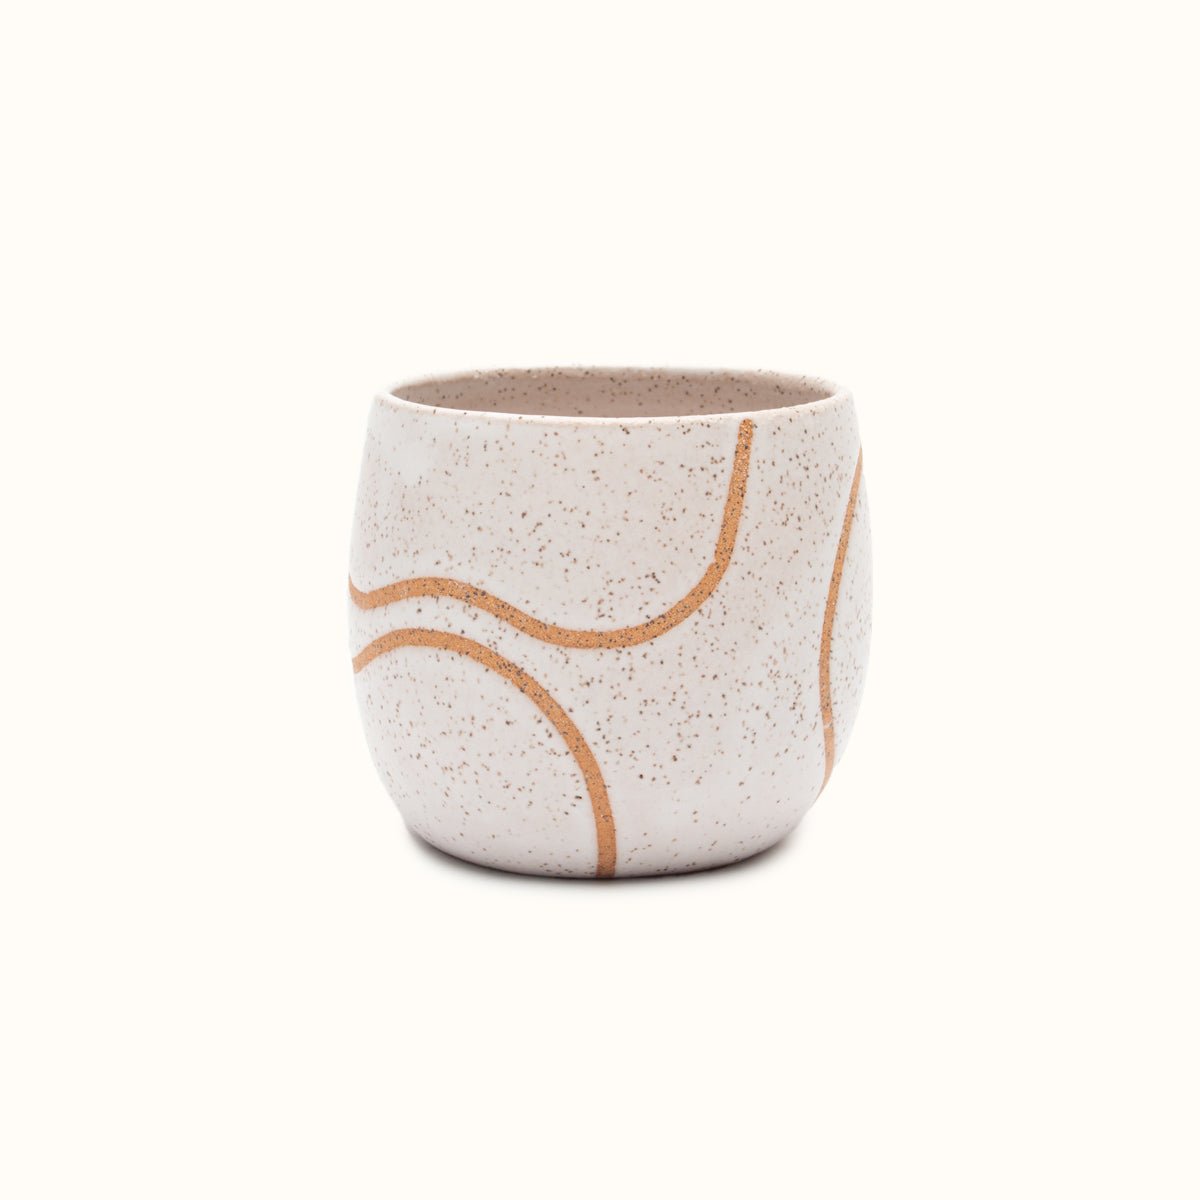 A handless mug in a white matte finish with a single squiggle design in raw speckled clay. The Tea Cup with Single Squiggle in White is designed by Kohai Ceramics and handmade in Portland, OR.